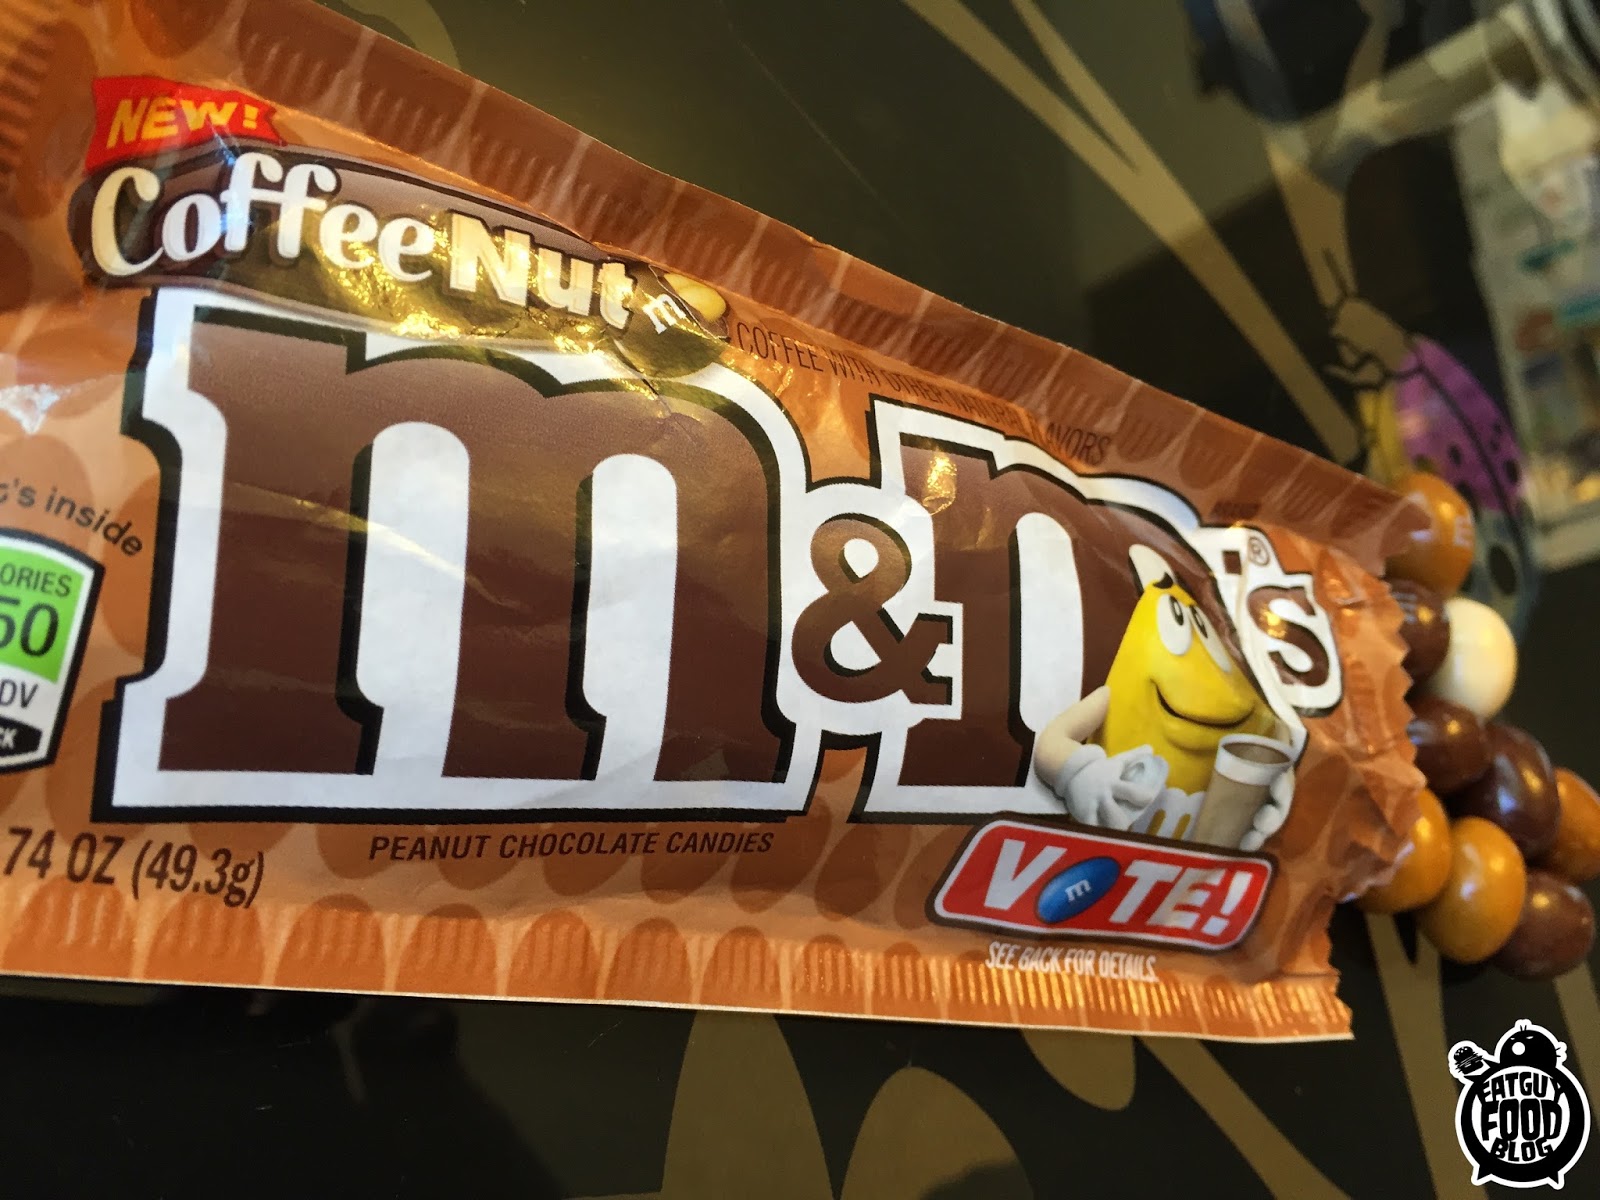 REVIEW: Coffee Nut, Honey Nut, and Chili Nut M&M's (M&M's Flavor